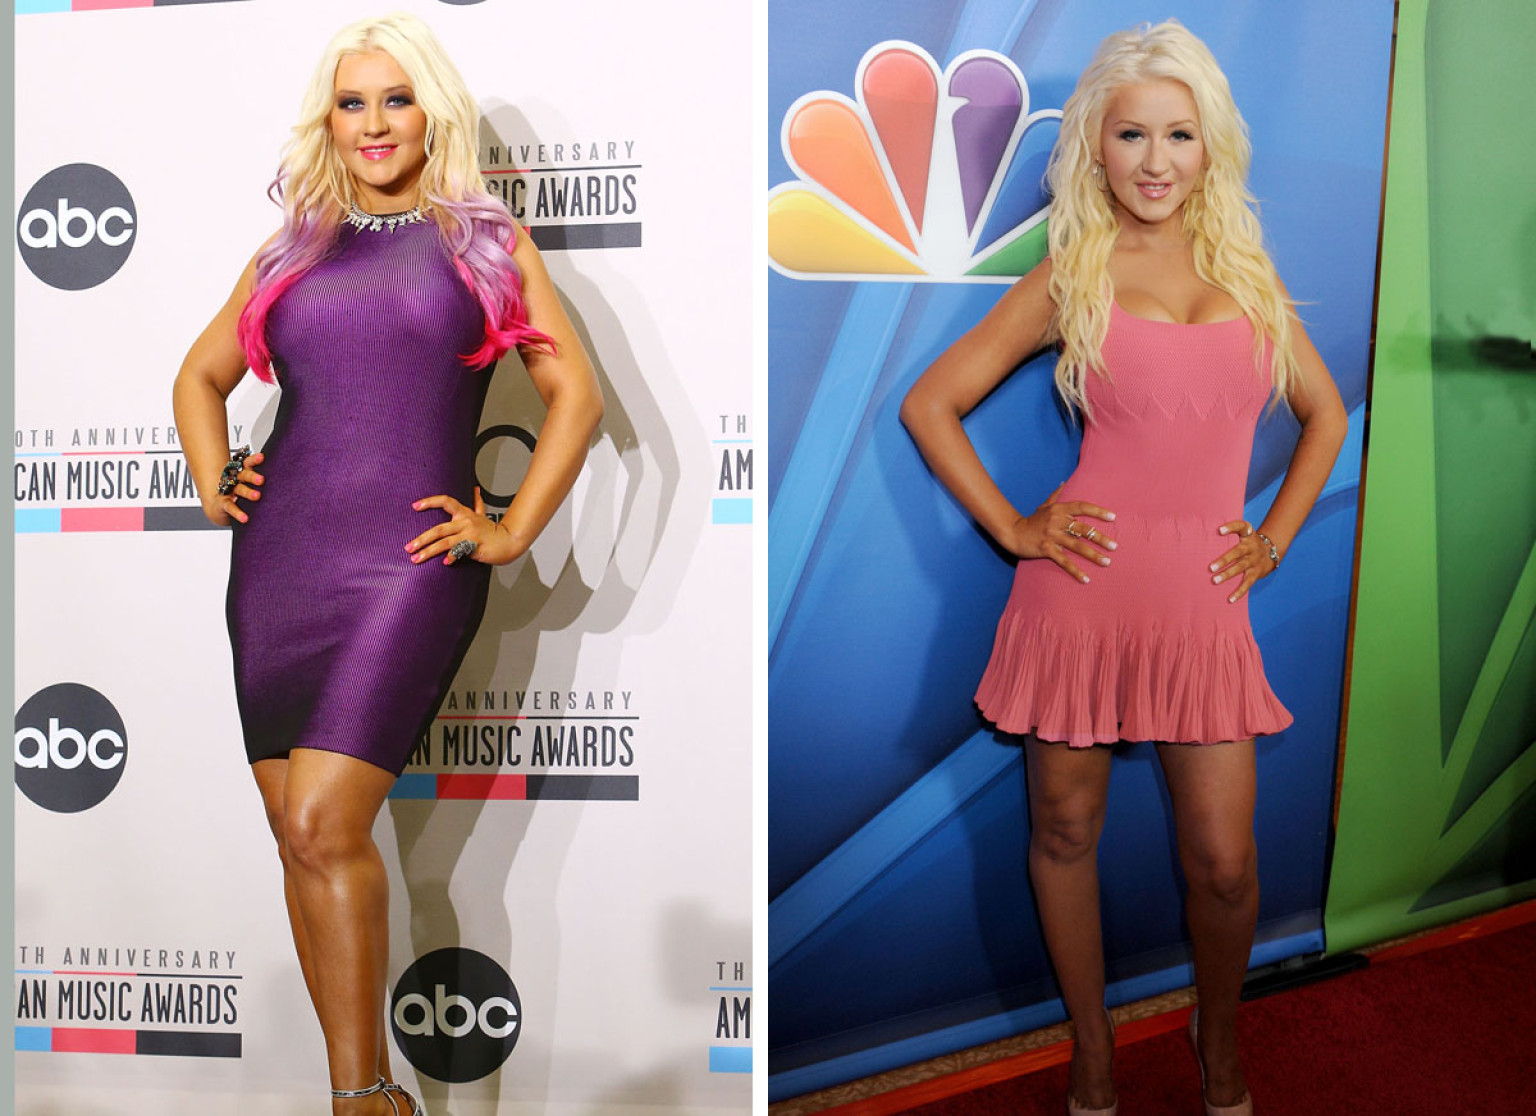 amazing celebrity weight loss transformations - Niversary "Ic Awards abc Oth Anniver Can Music Awa Anniversary Music Awards Th Anniversary Th An Music Awards abc